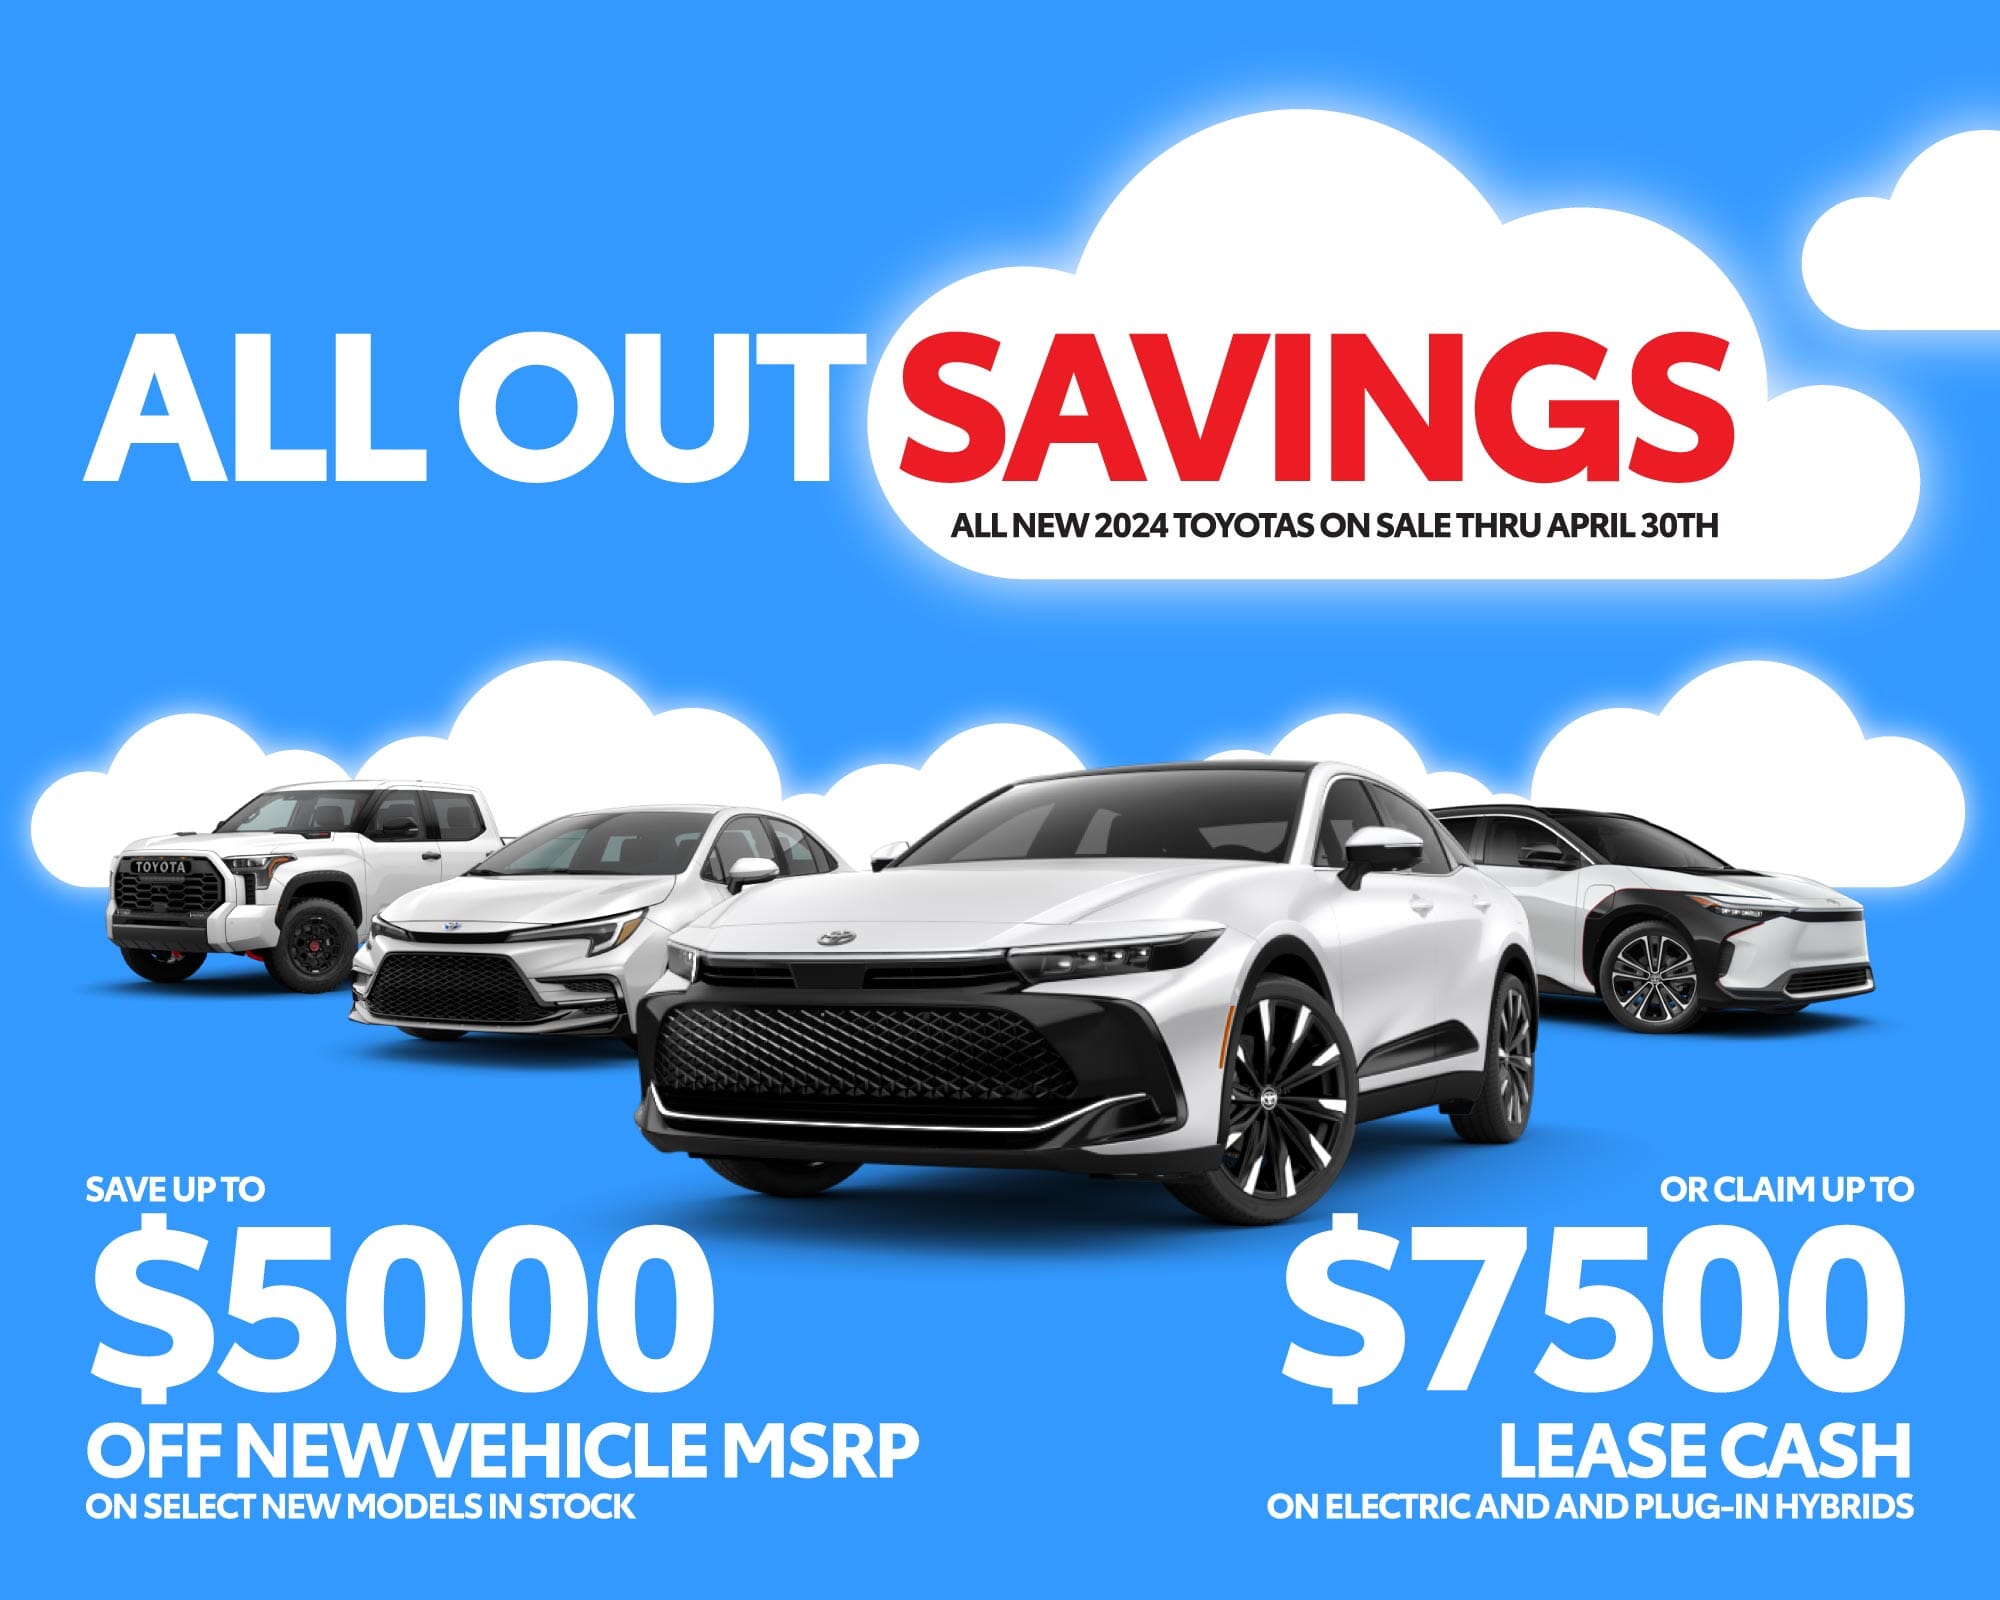 Toyota sale: Savings up to $5000 off MSRP and lease cash up to $7500 on select new Toyota models